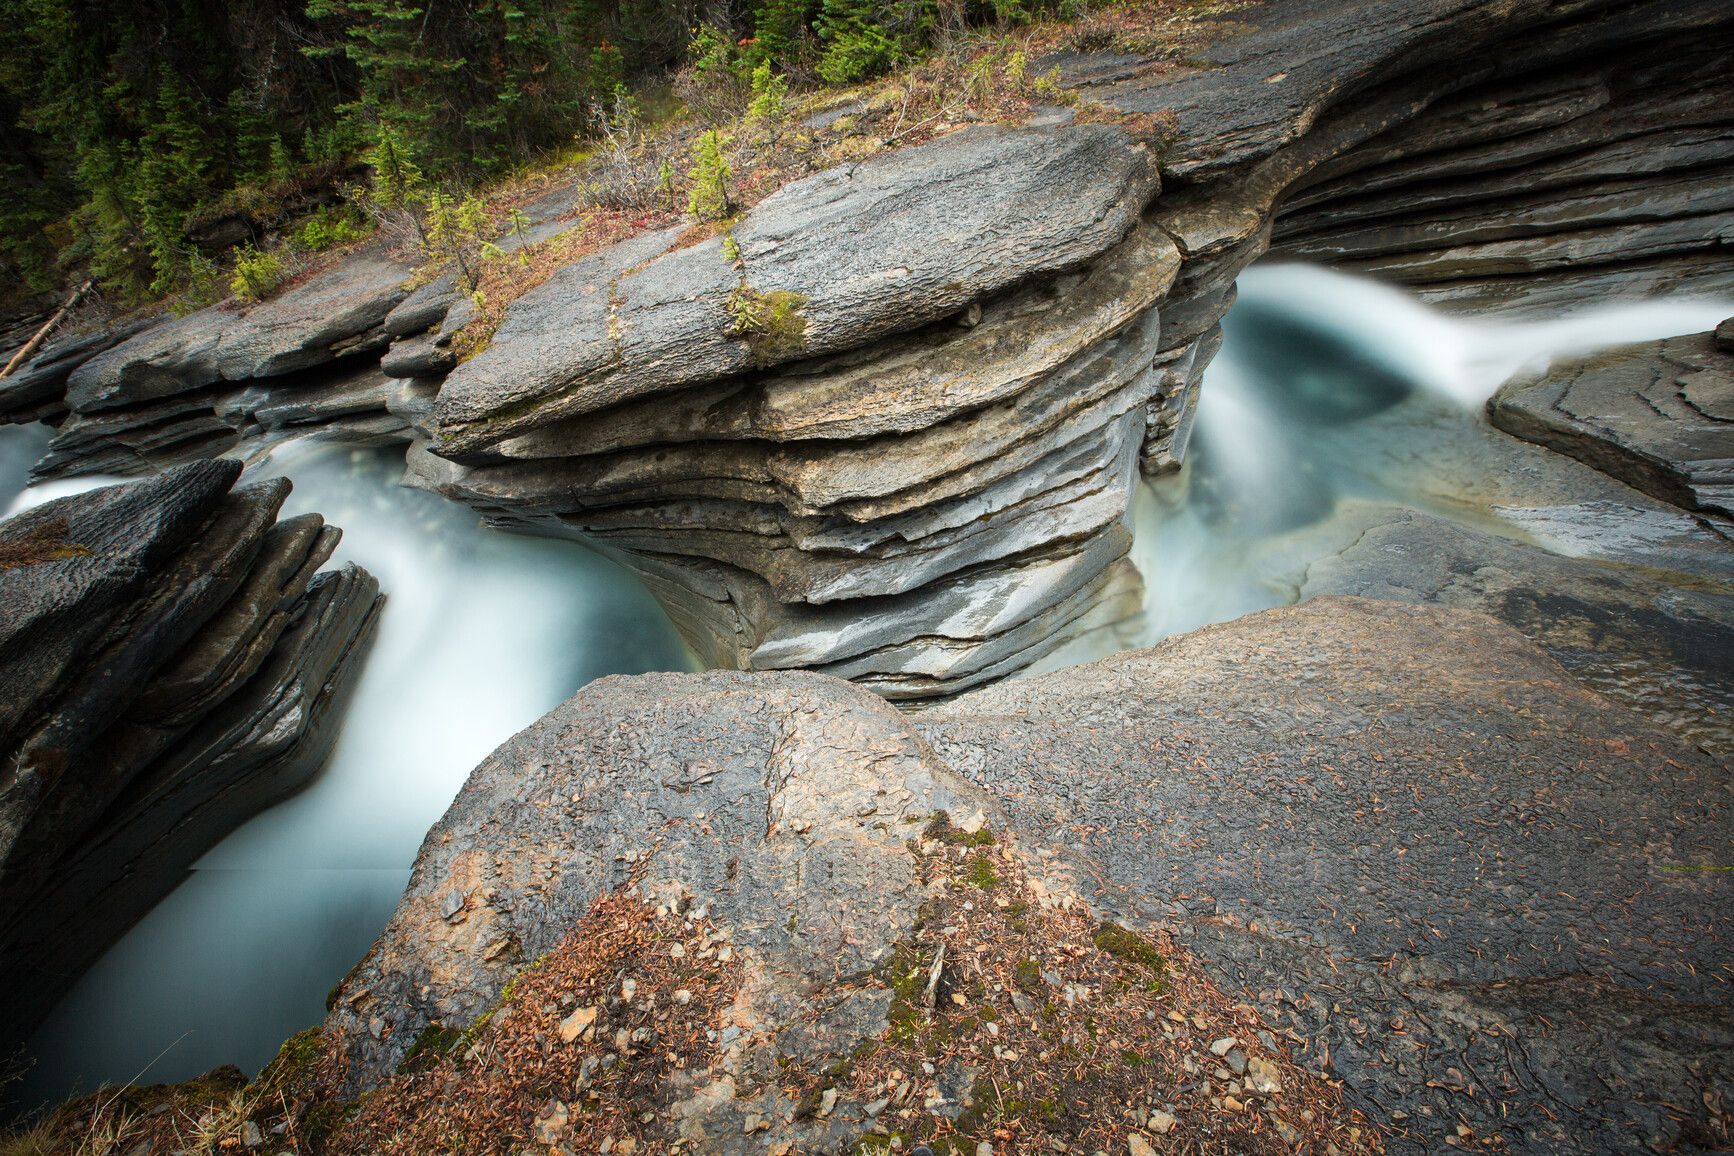 Toboggan Creek cuts its way through the limestone canyon it has created. The erosion of the sedimentary rock creates unique geological formations. Mount Robson Park.